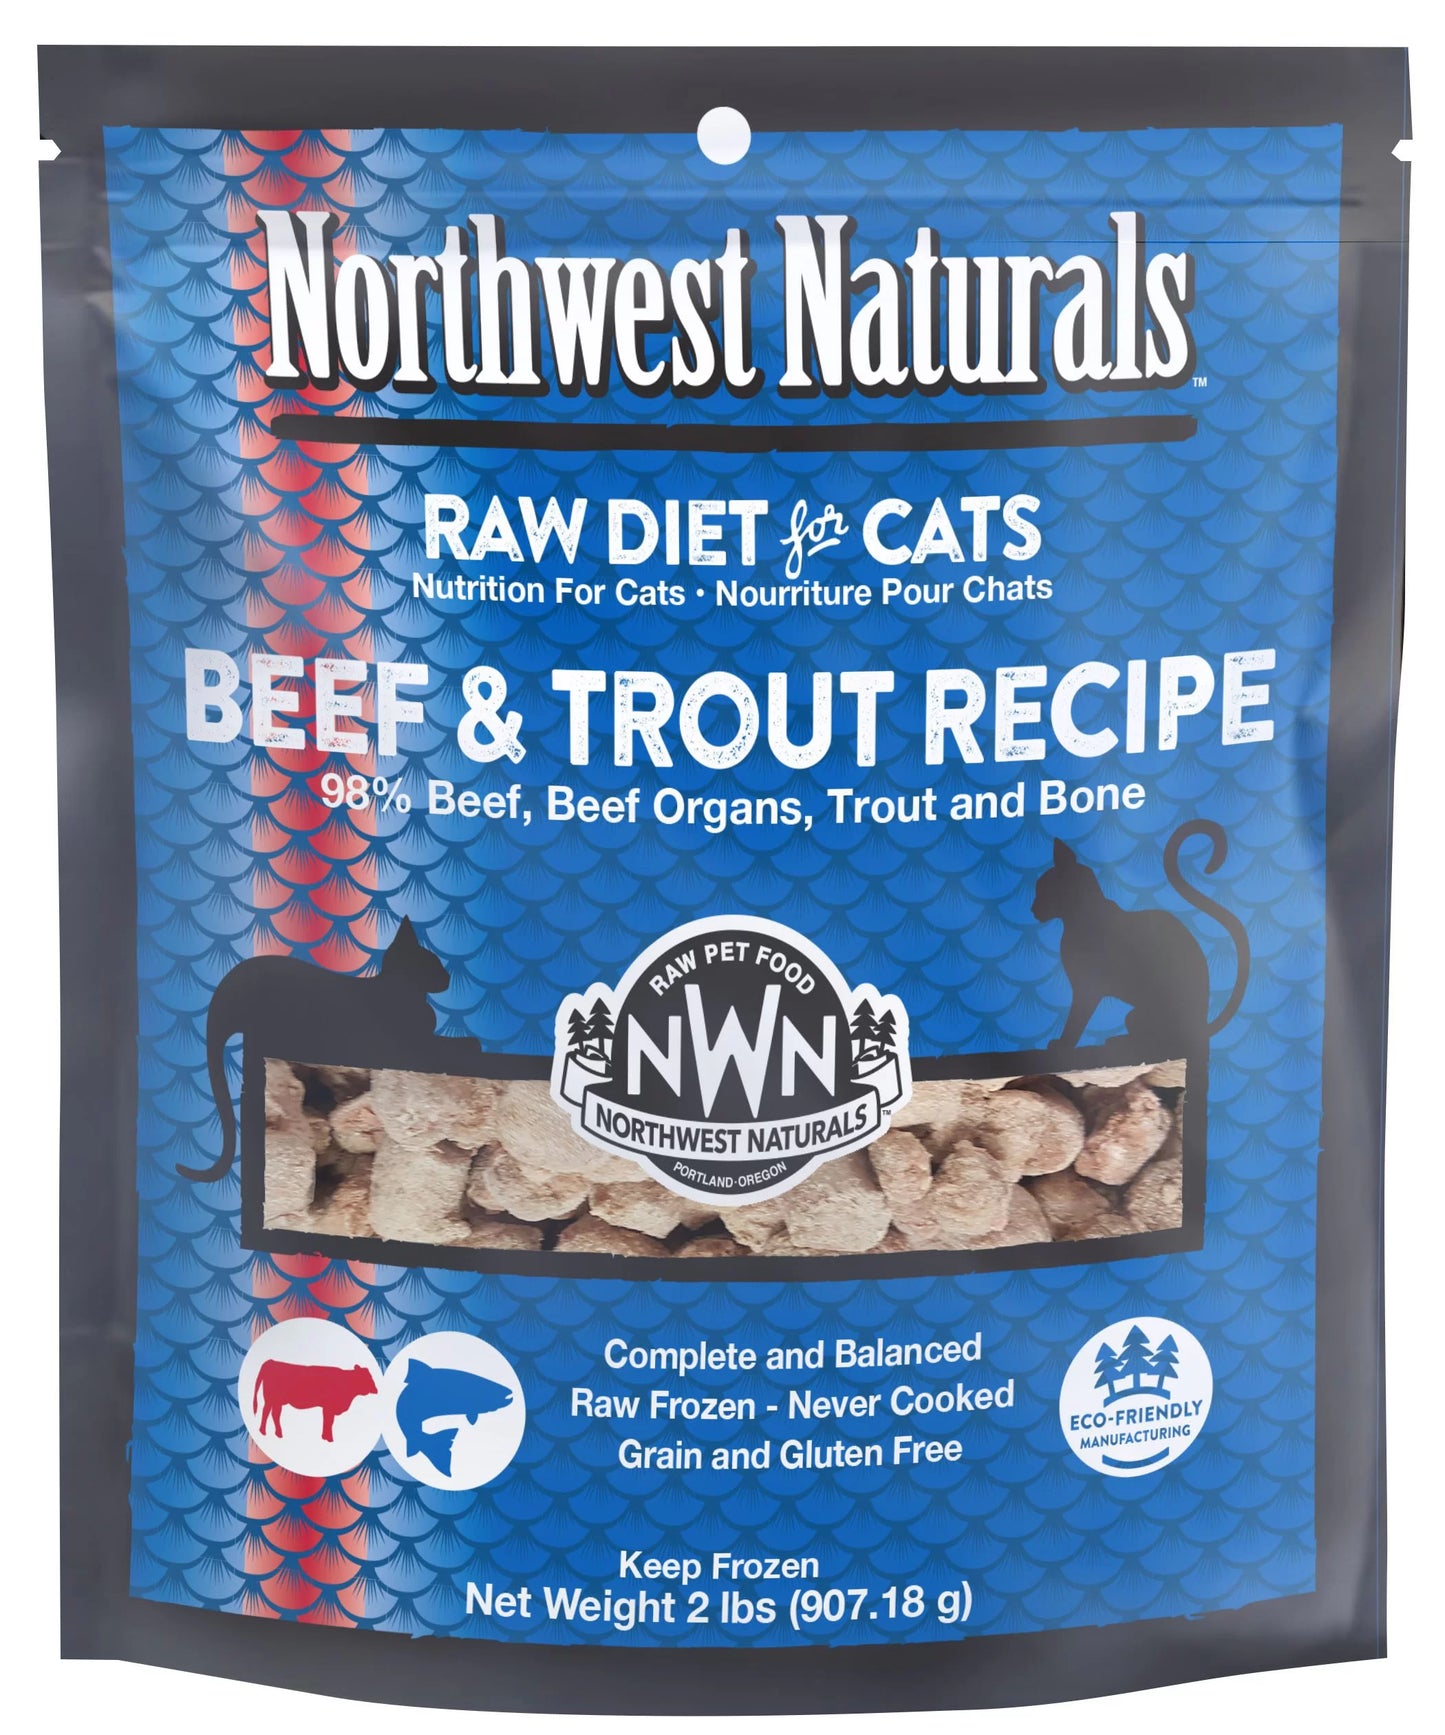 Northwest Naturals Raw Diet for Cats Beef & Trout Recipe